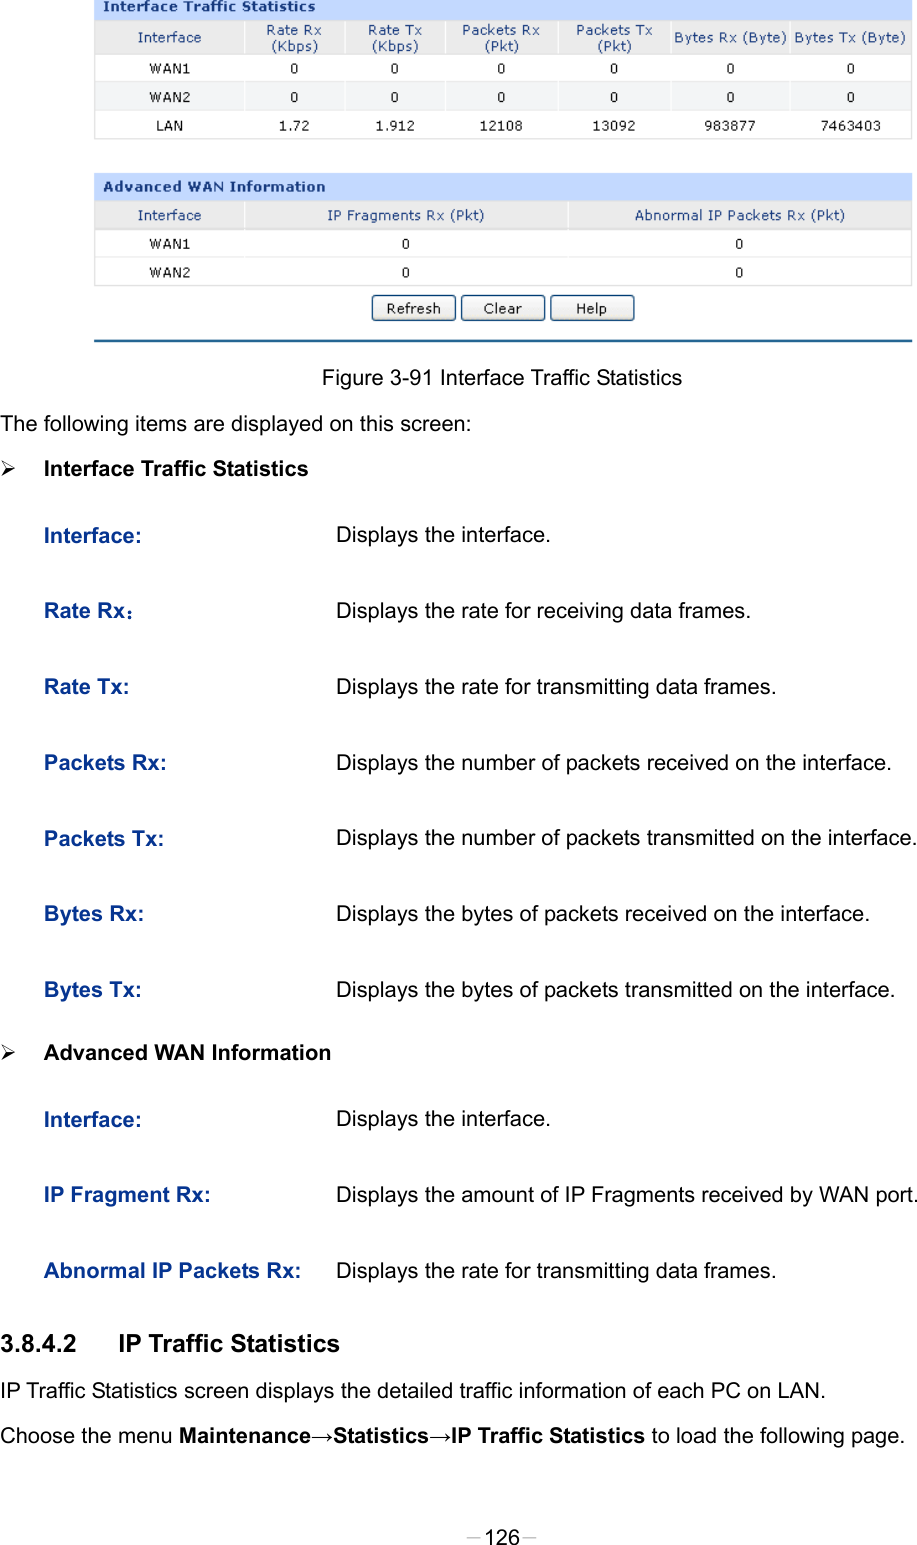   Figure 3-91 Interface Traffic Statistics The following items are displayed on this screen:  Interface Traffic Statistics Interface: Displays the interface. Rate Rx： Displays the rate for receiving data frames. Rate Tx: Displays the rate for transmitting data frames. Packets Rx: Displays the number of packets received on the interface.   Packets Tx: Displays the number of packets transmitted on the interface. Bytes Rx: Displays the bytes of packets received on the interface. Bytes Tx: Displays the bytes of packets transmitted on the interface.  Advanced WAN Information Interface: Displays the interface. IP Fragment Rx: Displays the amount of IP Fragments received by WAN port.  Abnormal IP Packets Rx: Displays the rate for transmitting data frames. 3.8.4.2 IP Traffic Statistics IP Traffic Statistics screen displays the detailed traffic information of each PC on LAN. Choose the menu Maintenance→Statistics→IP Traffic Statistics to load the following page. -126- 